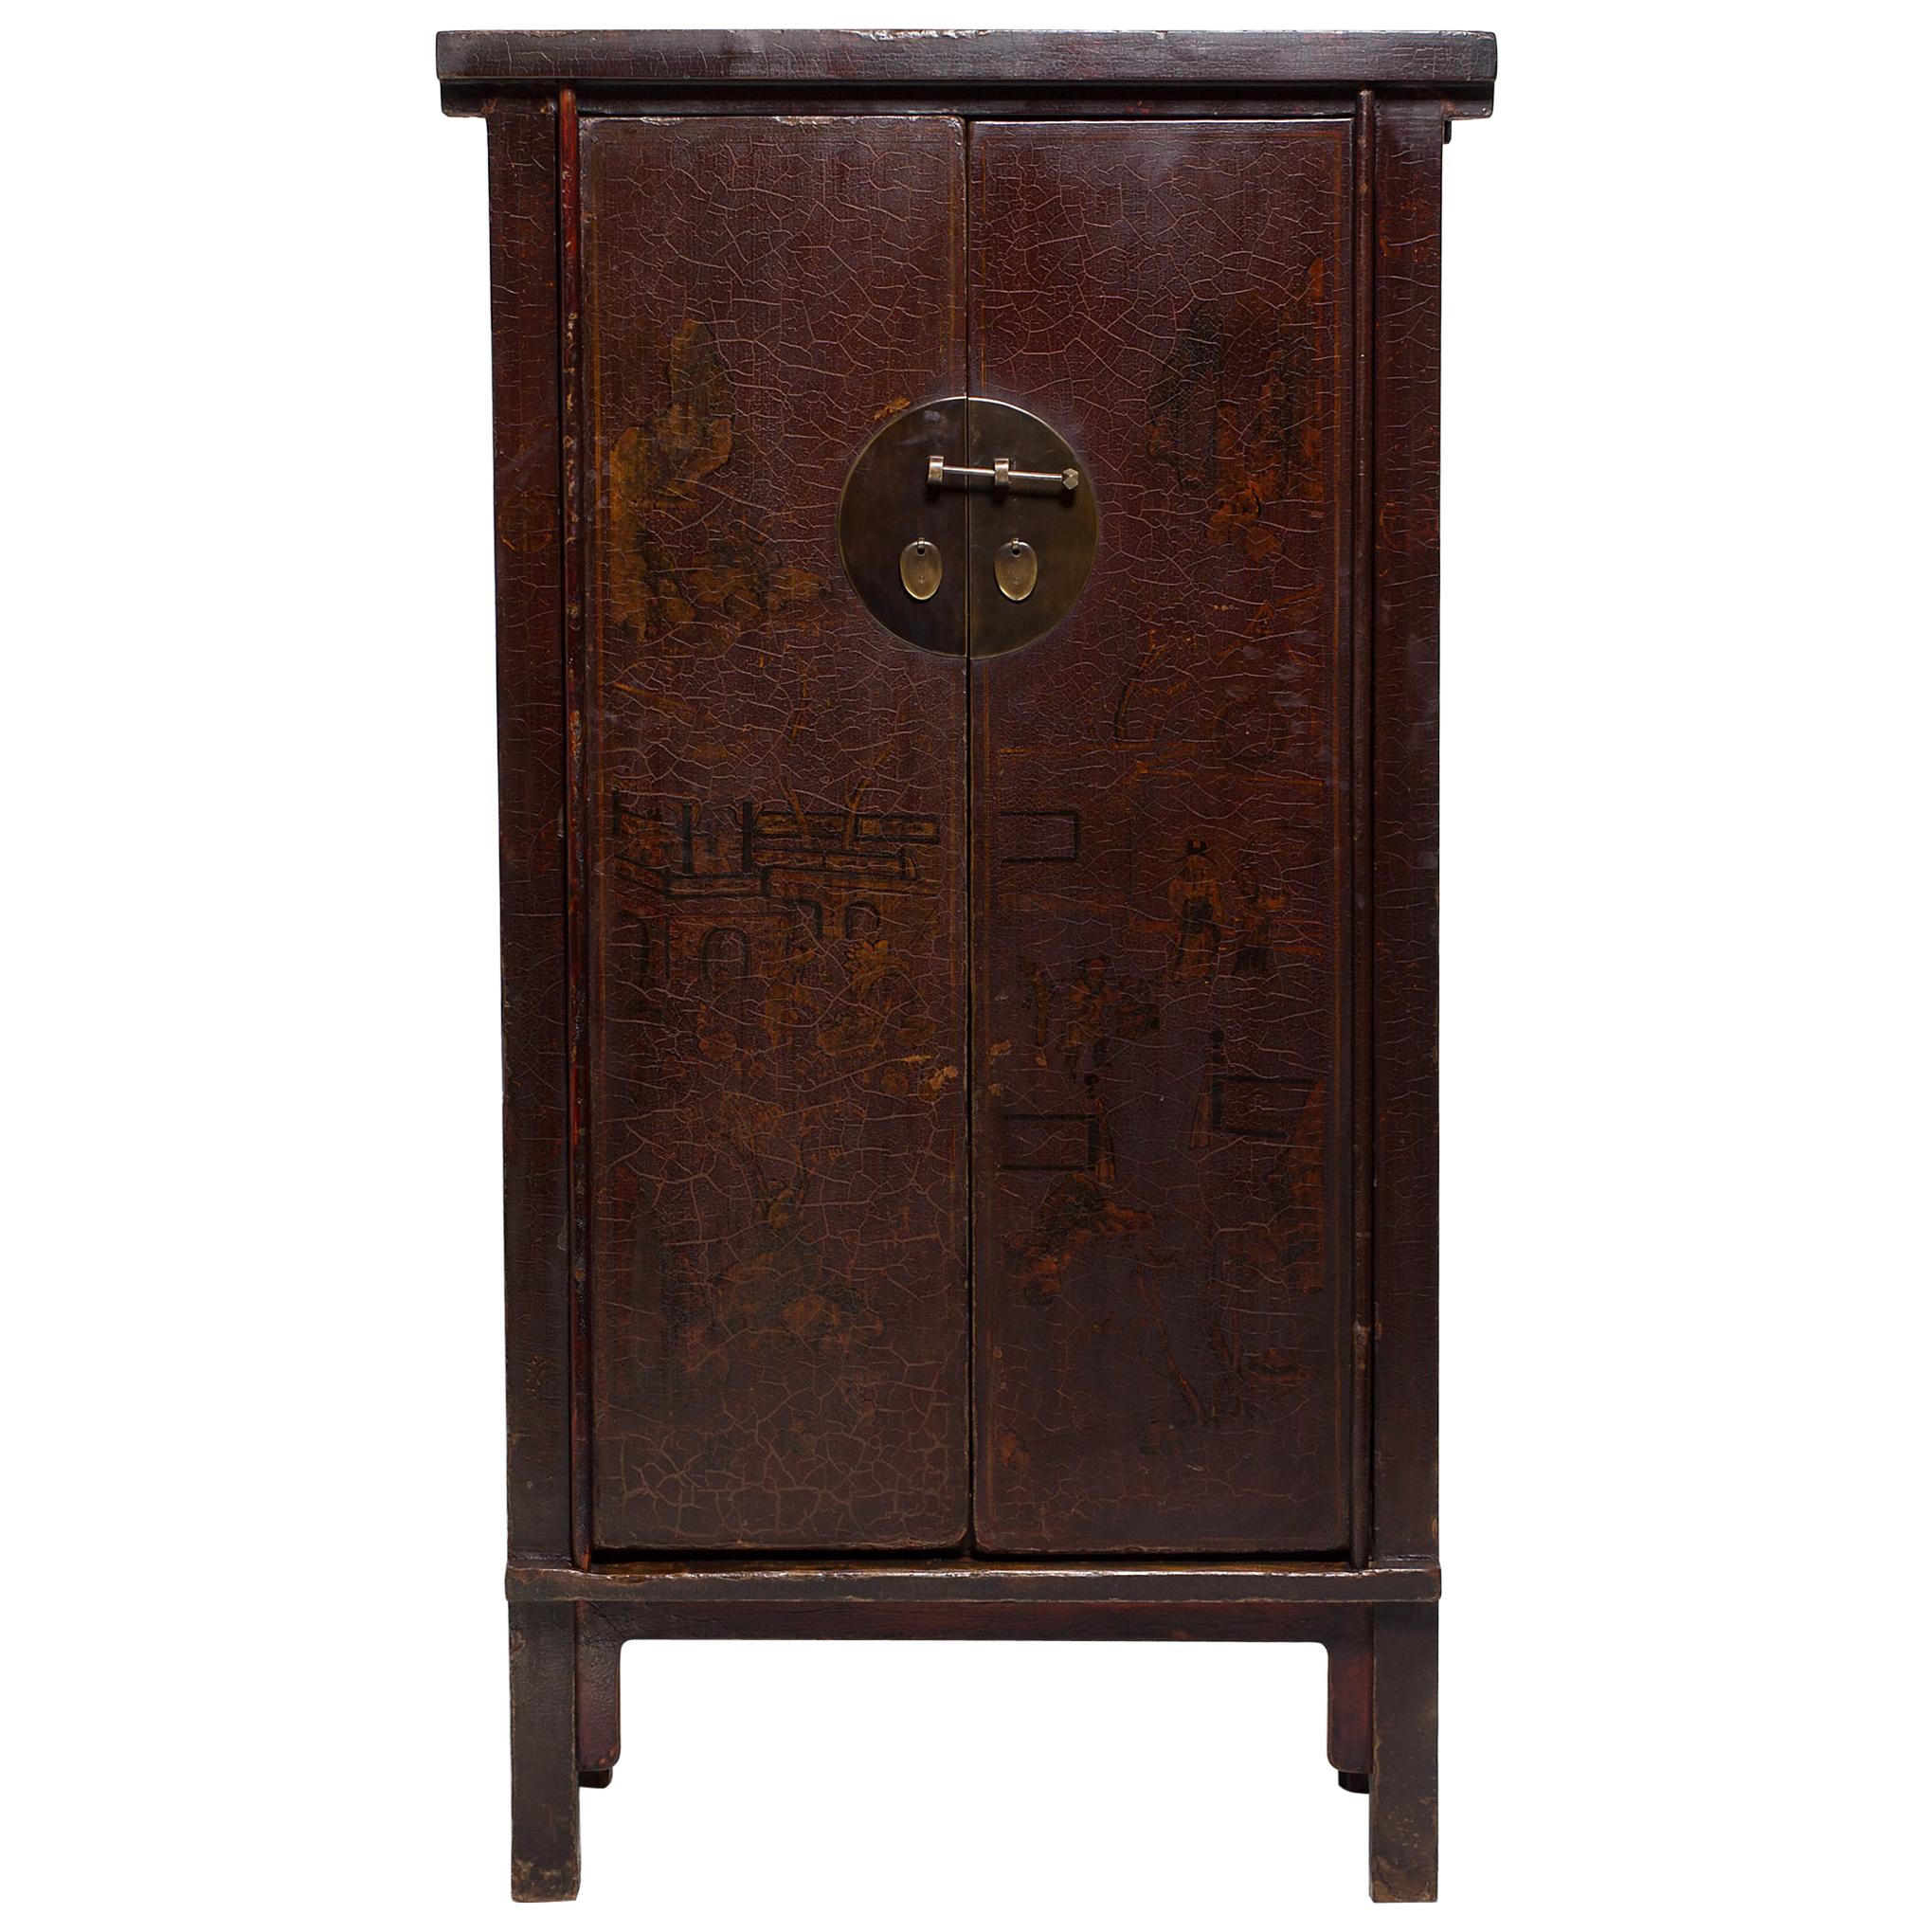 Chinese Painted Scholars' Cabinet, c. 1850